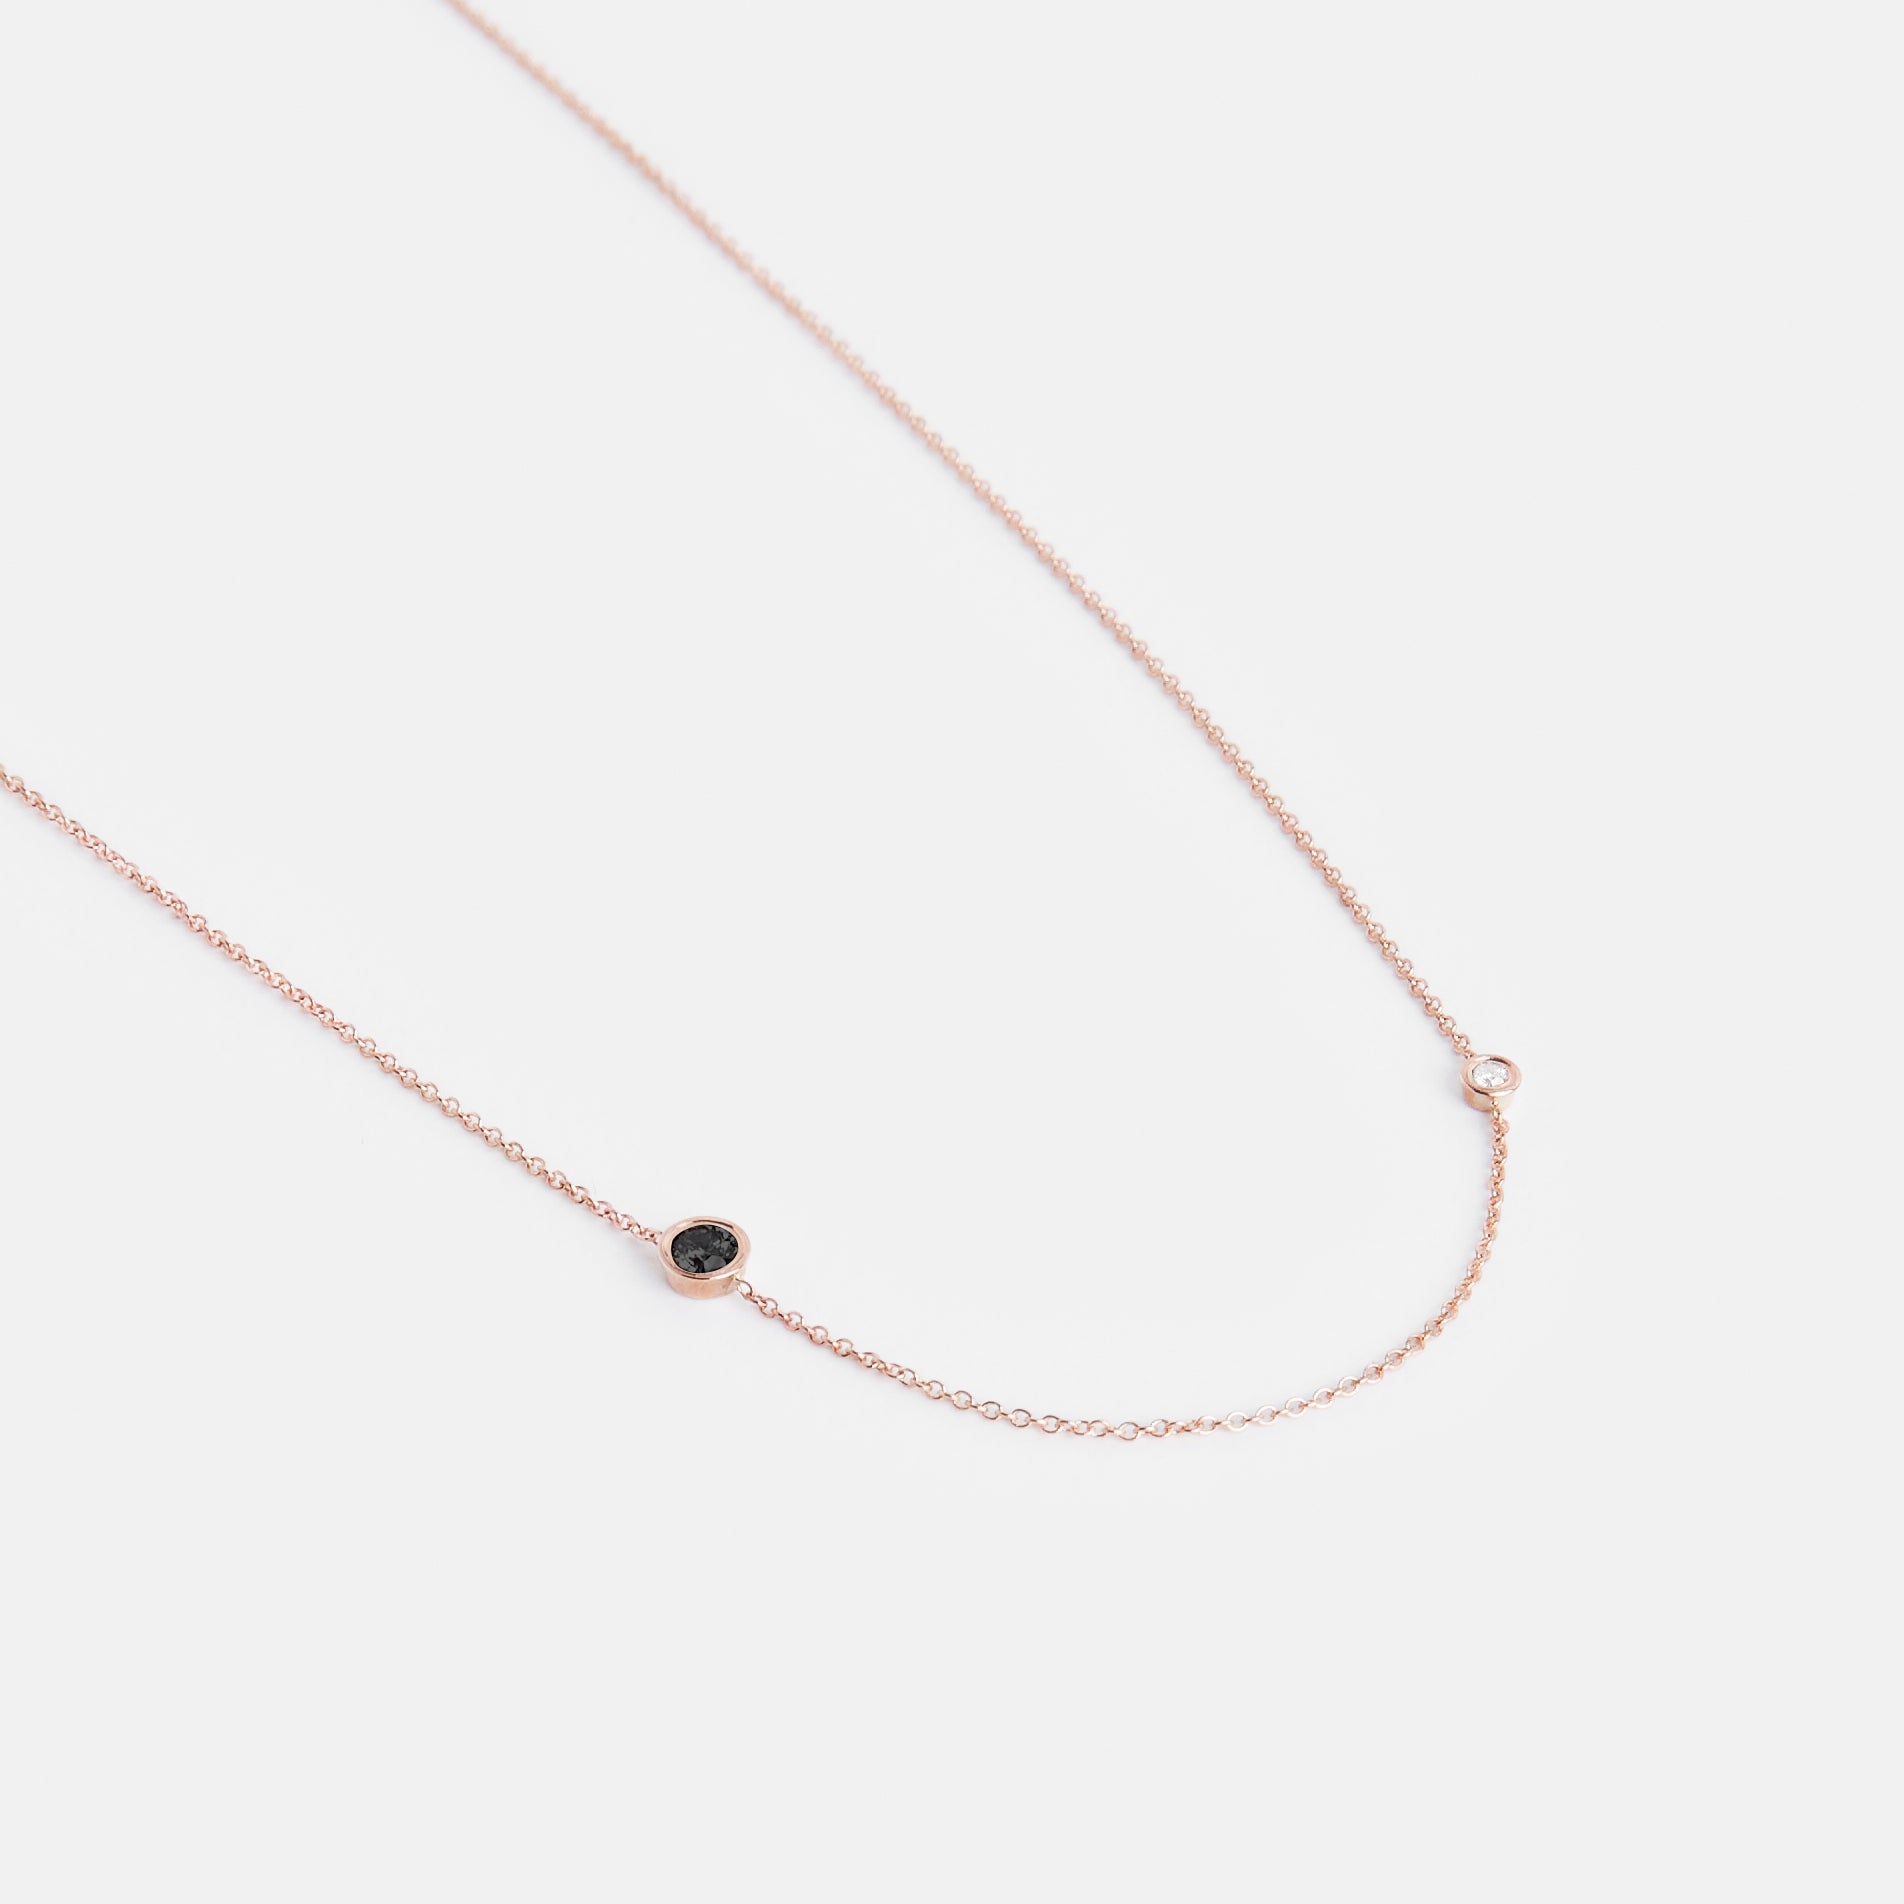 Iba Designer Necklace in 14k Rose Gold set with White and Black Diamonds By SHW Fine Jewelry NYC